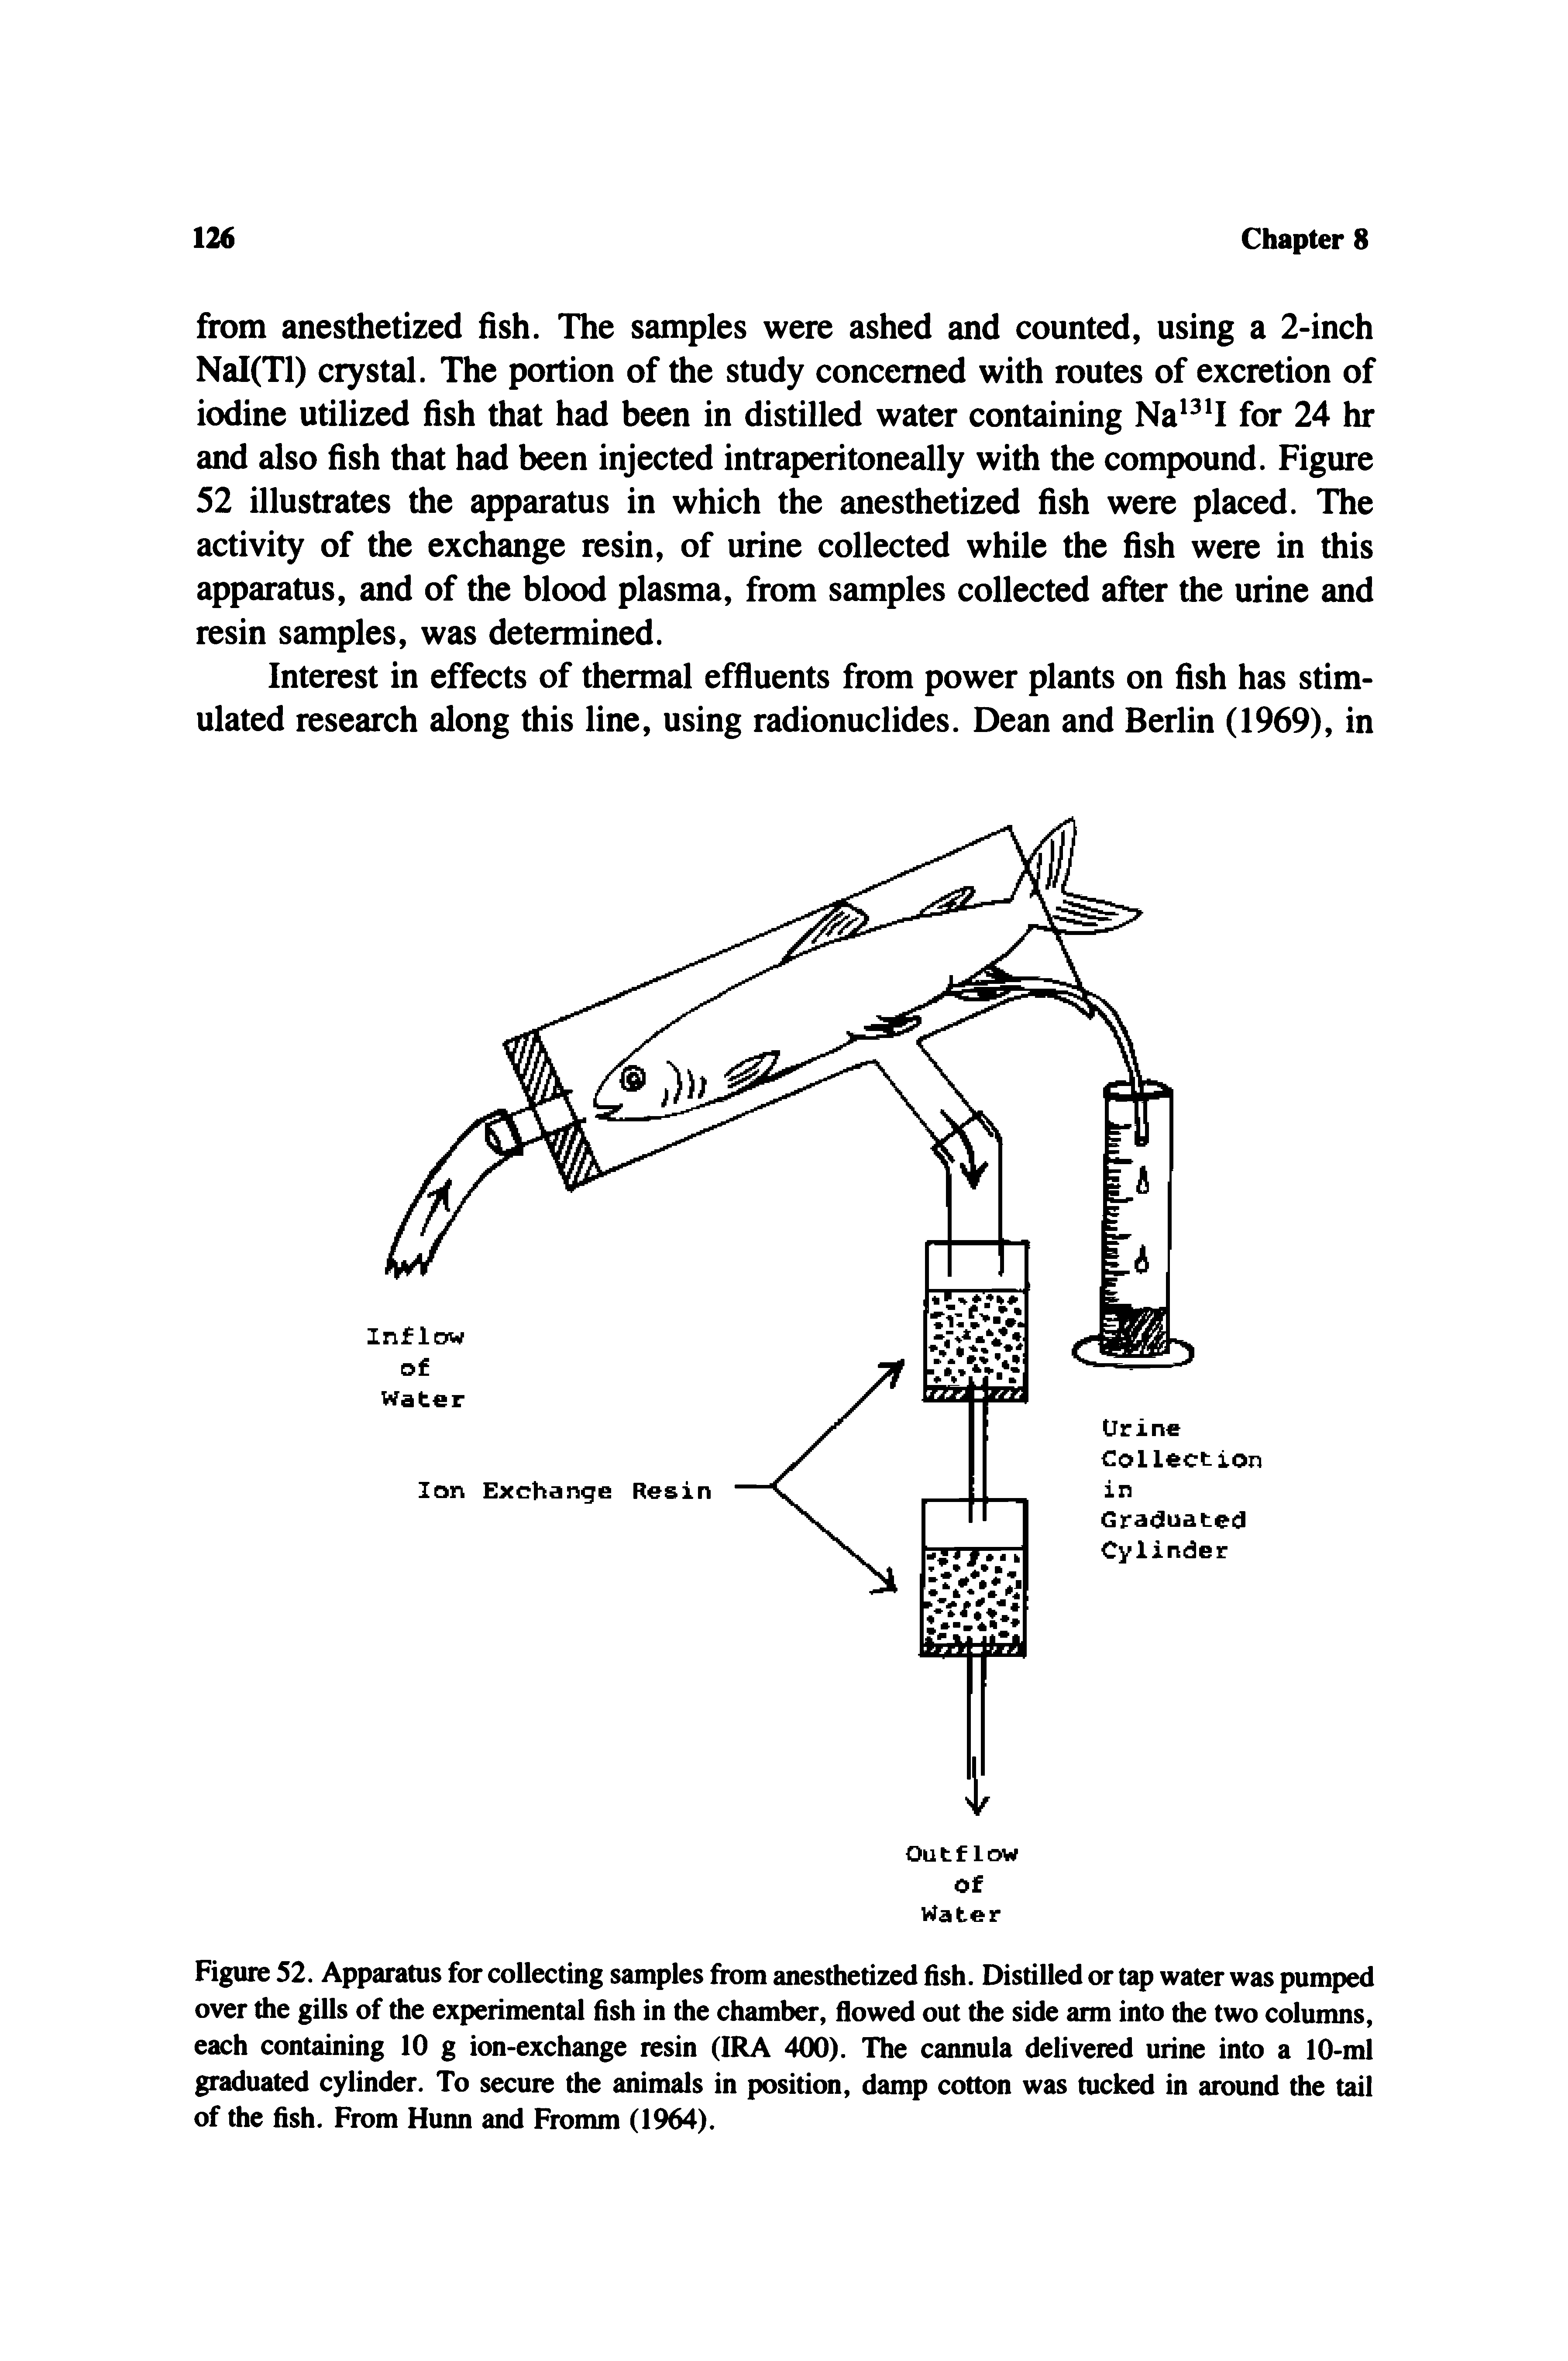 Figure 52. Apparatus for collecting samples from anesthetized fish. Distilled or tap water was pumped over the gills of the experimental fish in the chamber, flowed out the side arm into the two colunms, each containing 10 g ion-exchange resin (IRA 400). The cannula delivered urine into a 10-ml graduated cylinder. To secure the animals in position, damp cotton was tucked in around the tail of the fish. From Hunn and Fromm (1964).